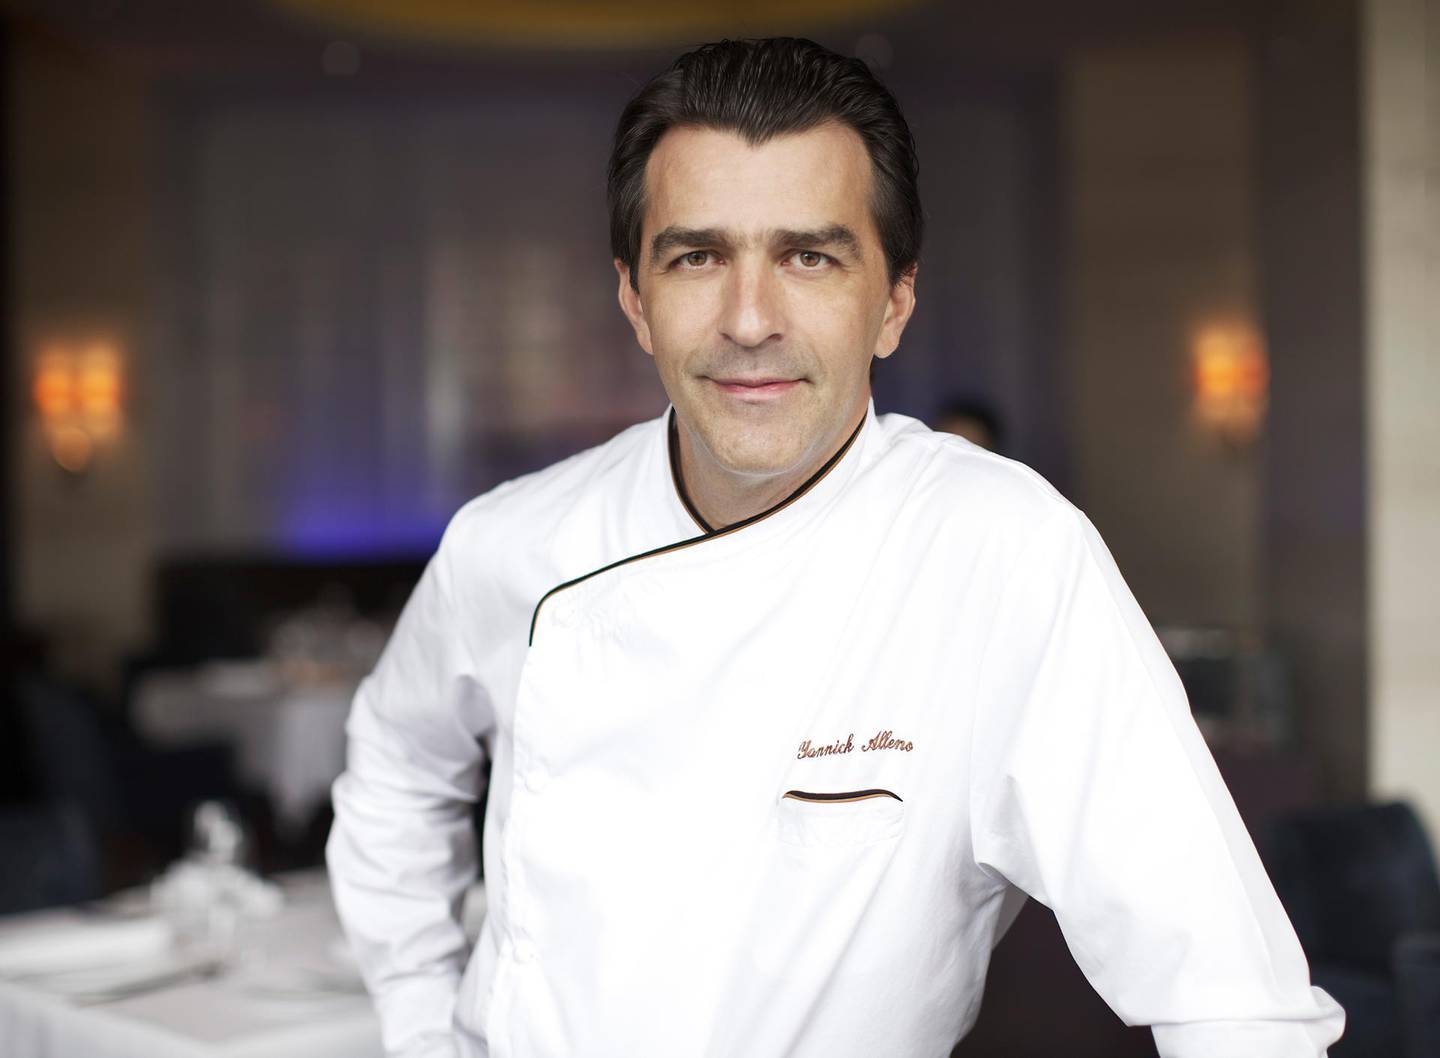 French chef Yannick Alleno oversees operations at One&Only The Palm. Courtesy Nicolas Buisson